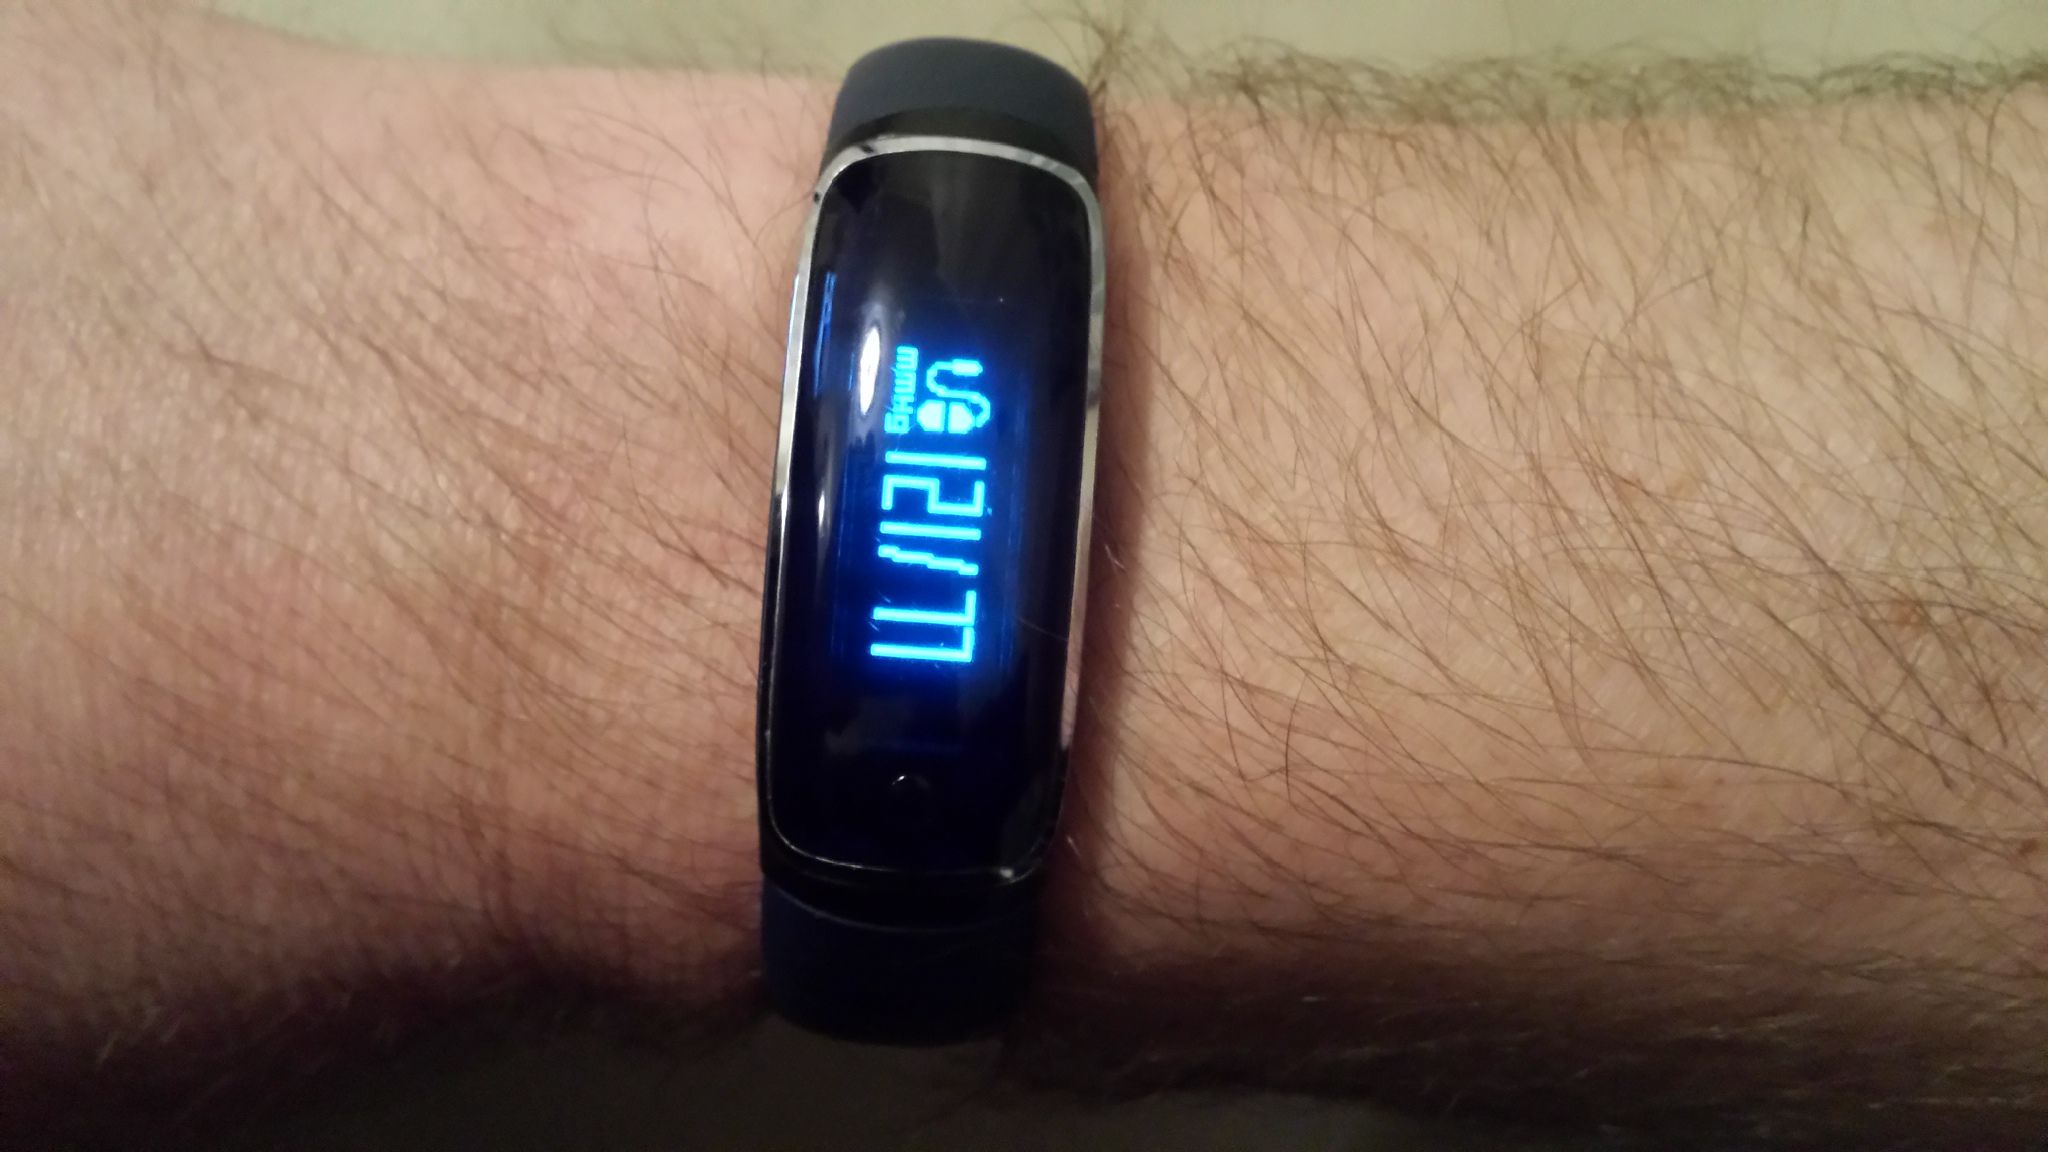 does the fitbit versa 2 track blood pressure